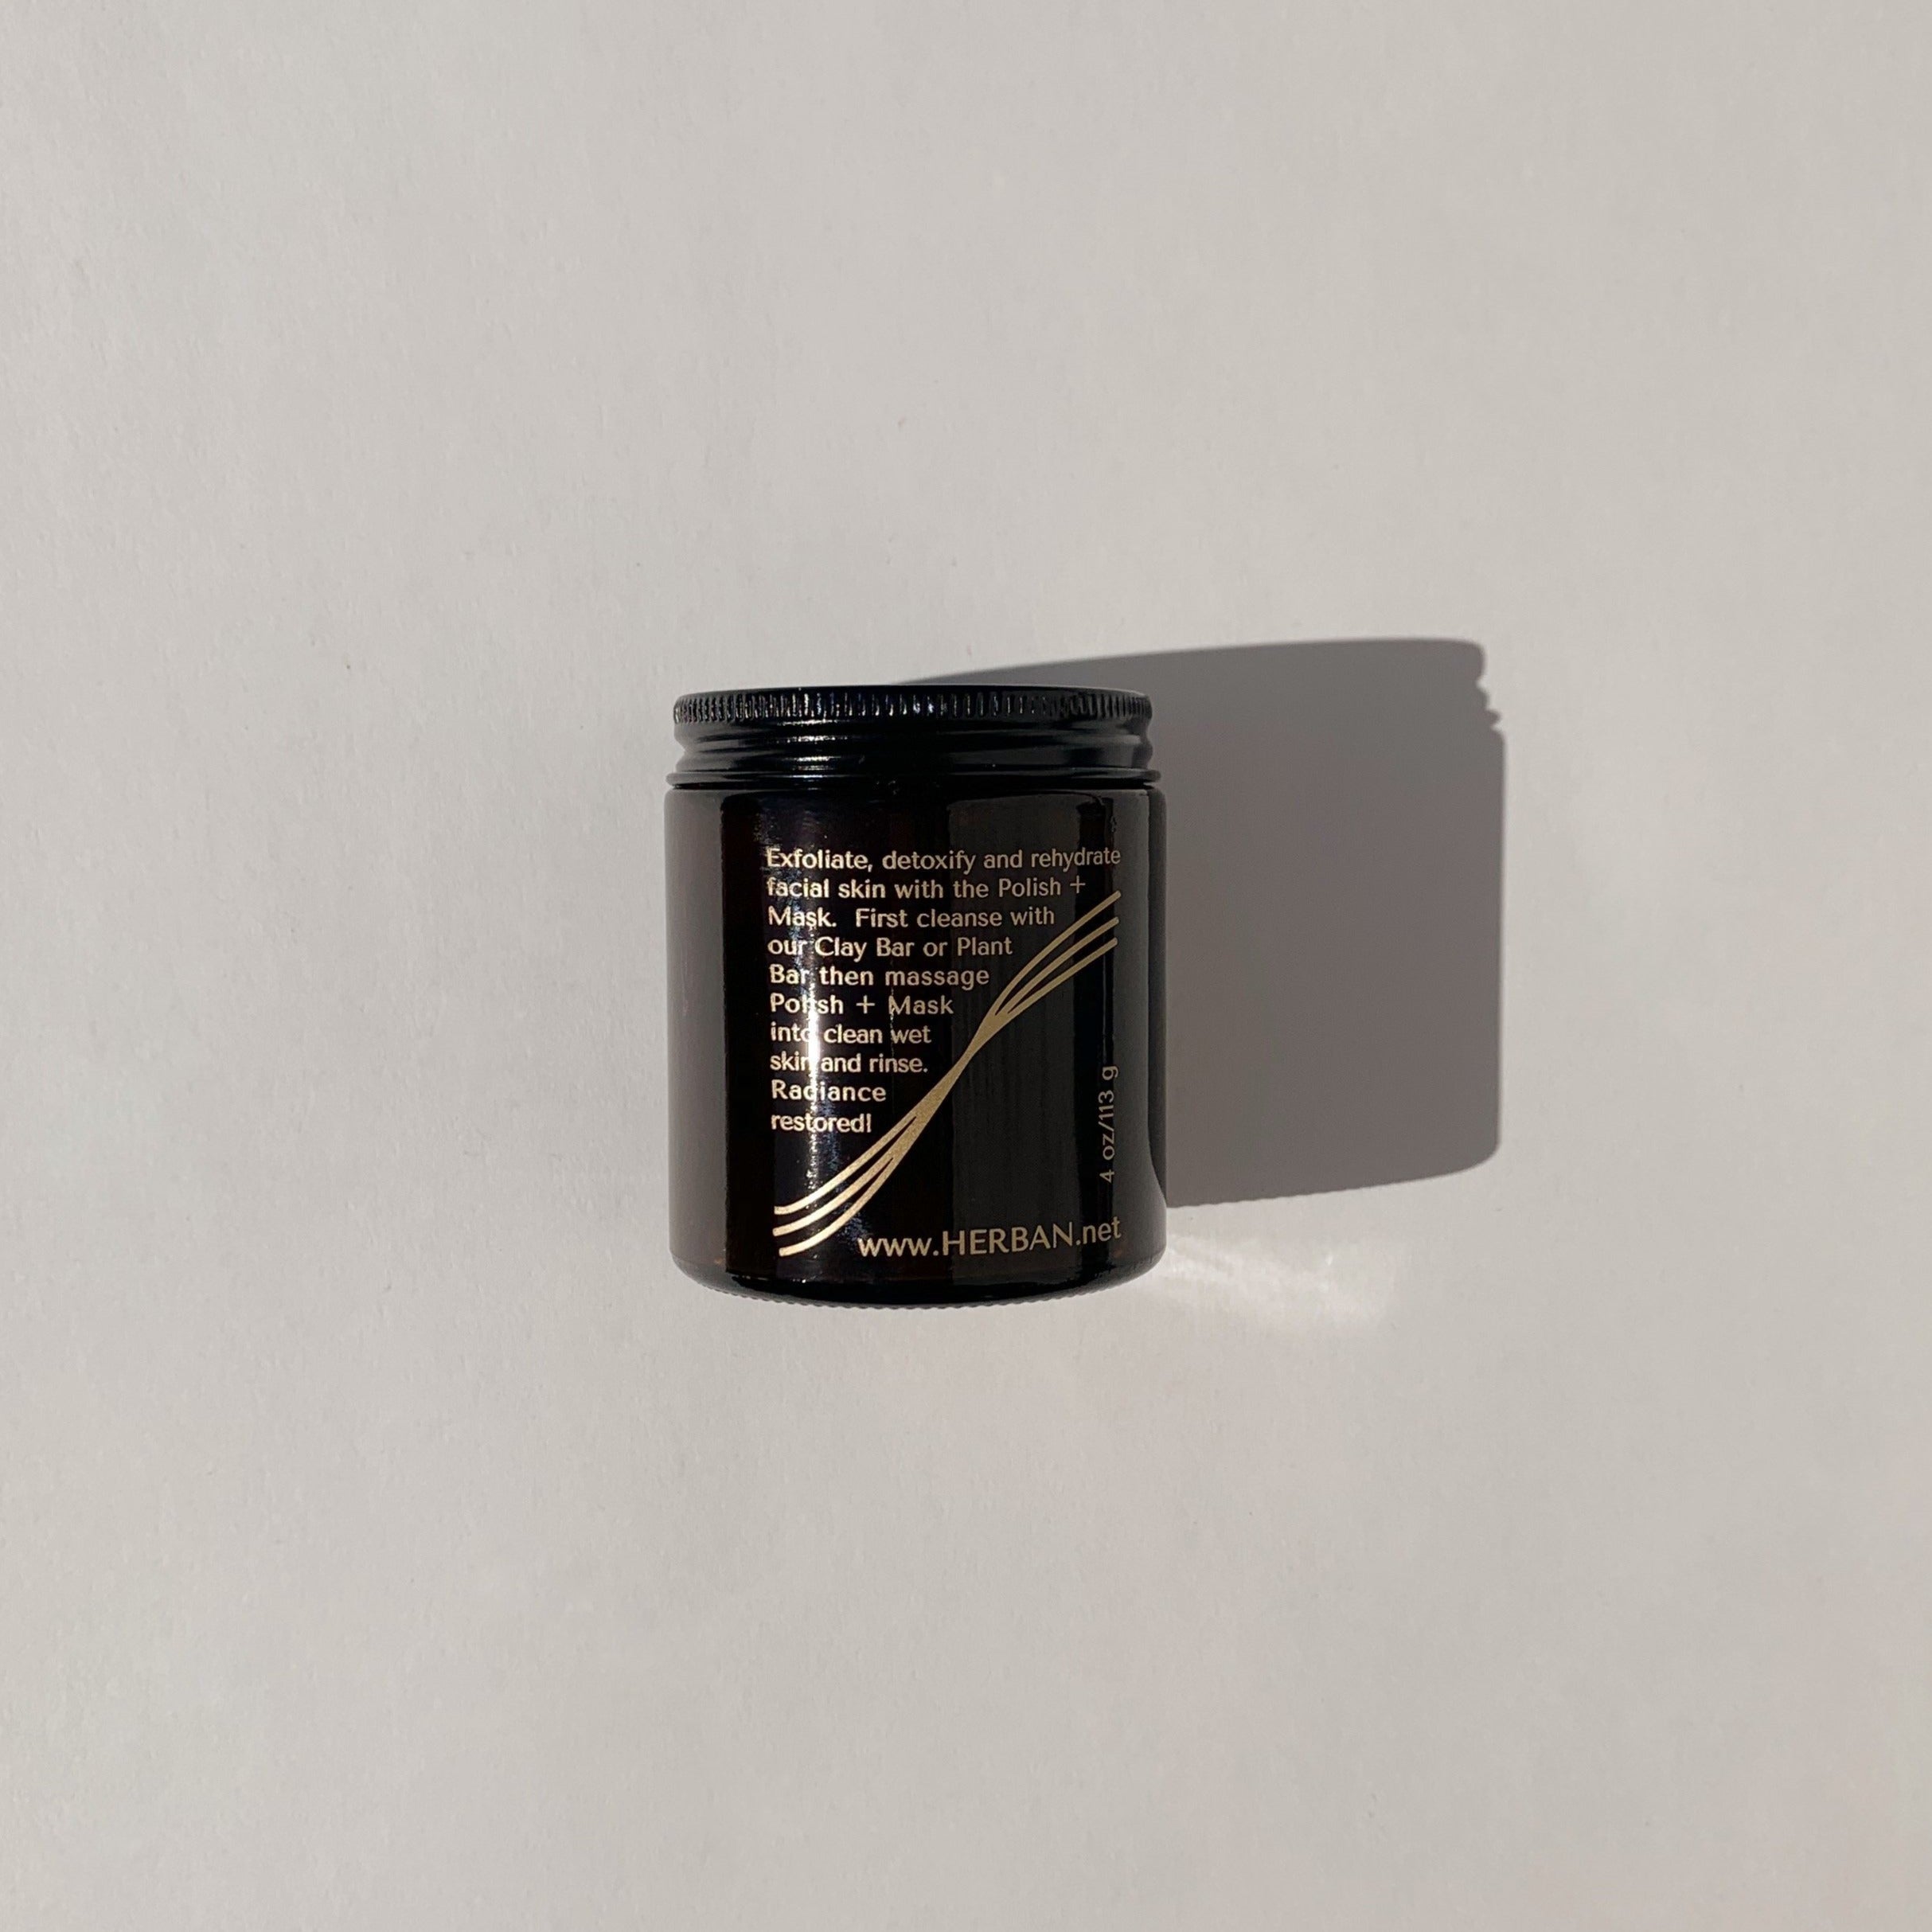 Triple-Action Face Polish + Mask jar by Herban